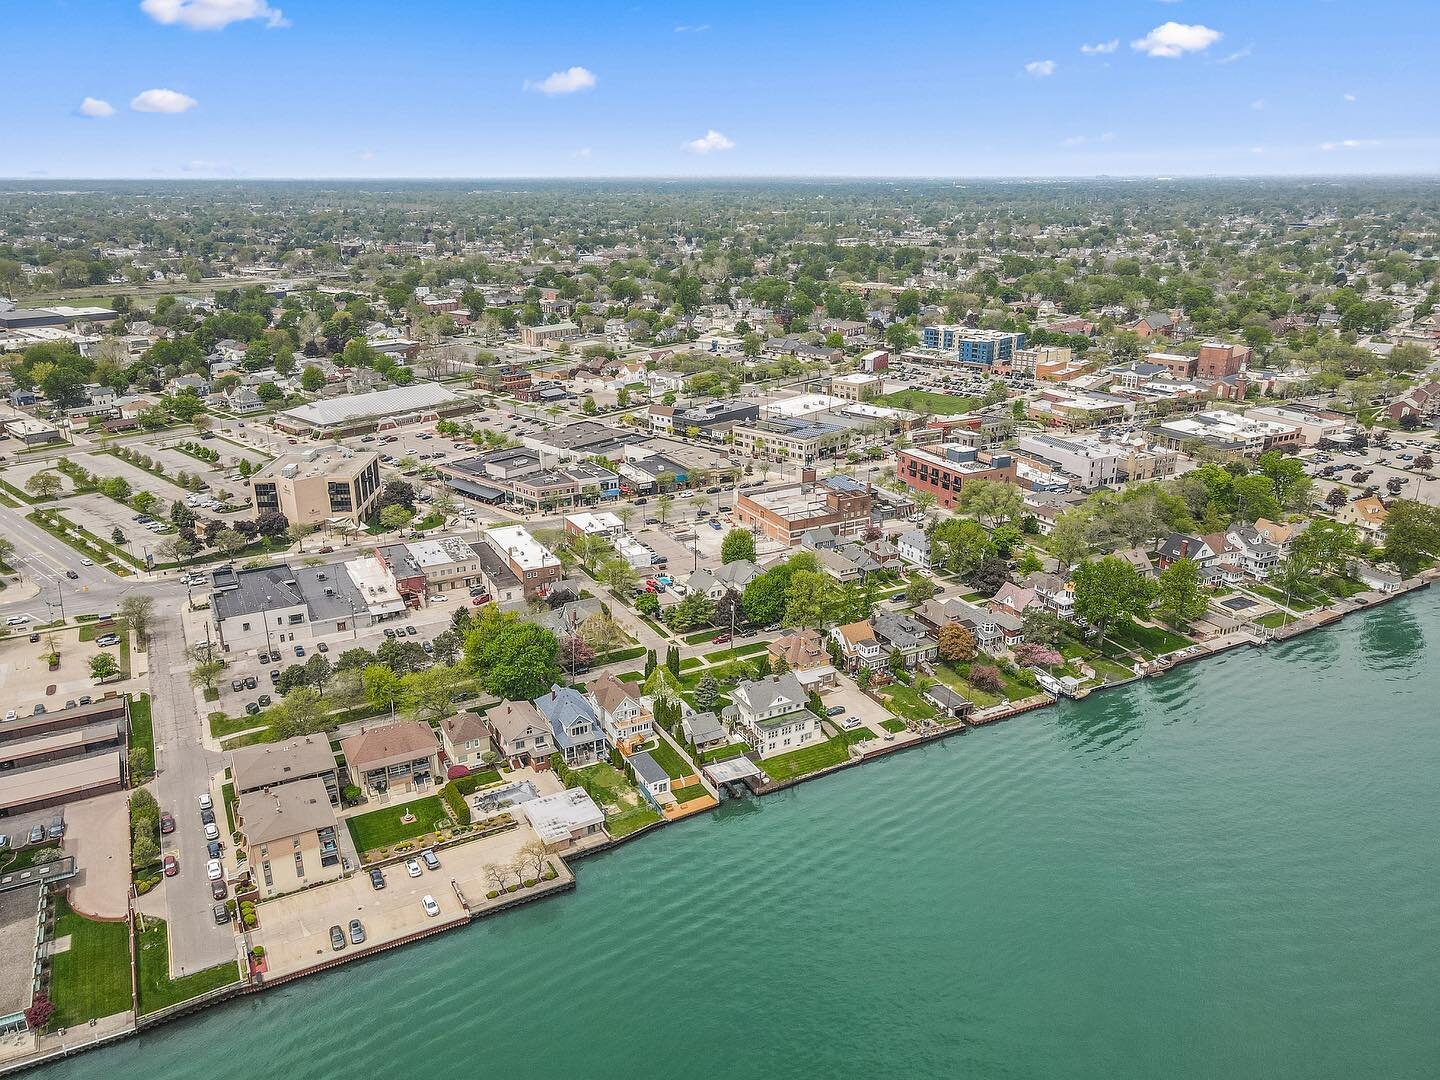 📍 Downtown Wyandotte

📲 Text me for drone photography 248-891-6723

#wyandotte #downtown #dronephotography #aerialphotography #detroitriver #listingphotography #detroitrealestate